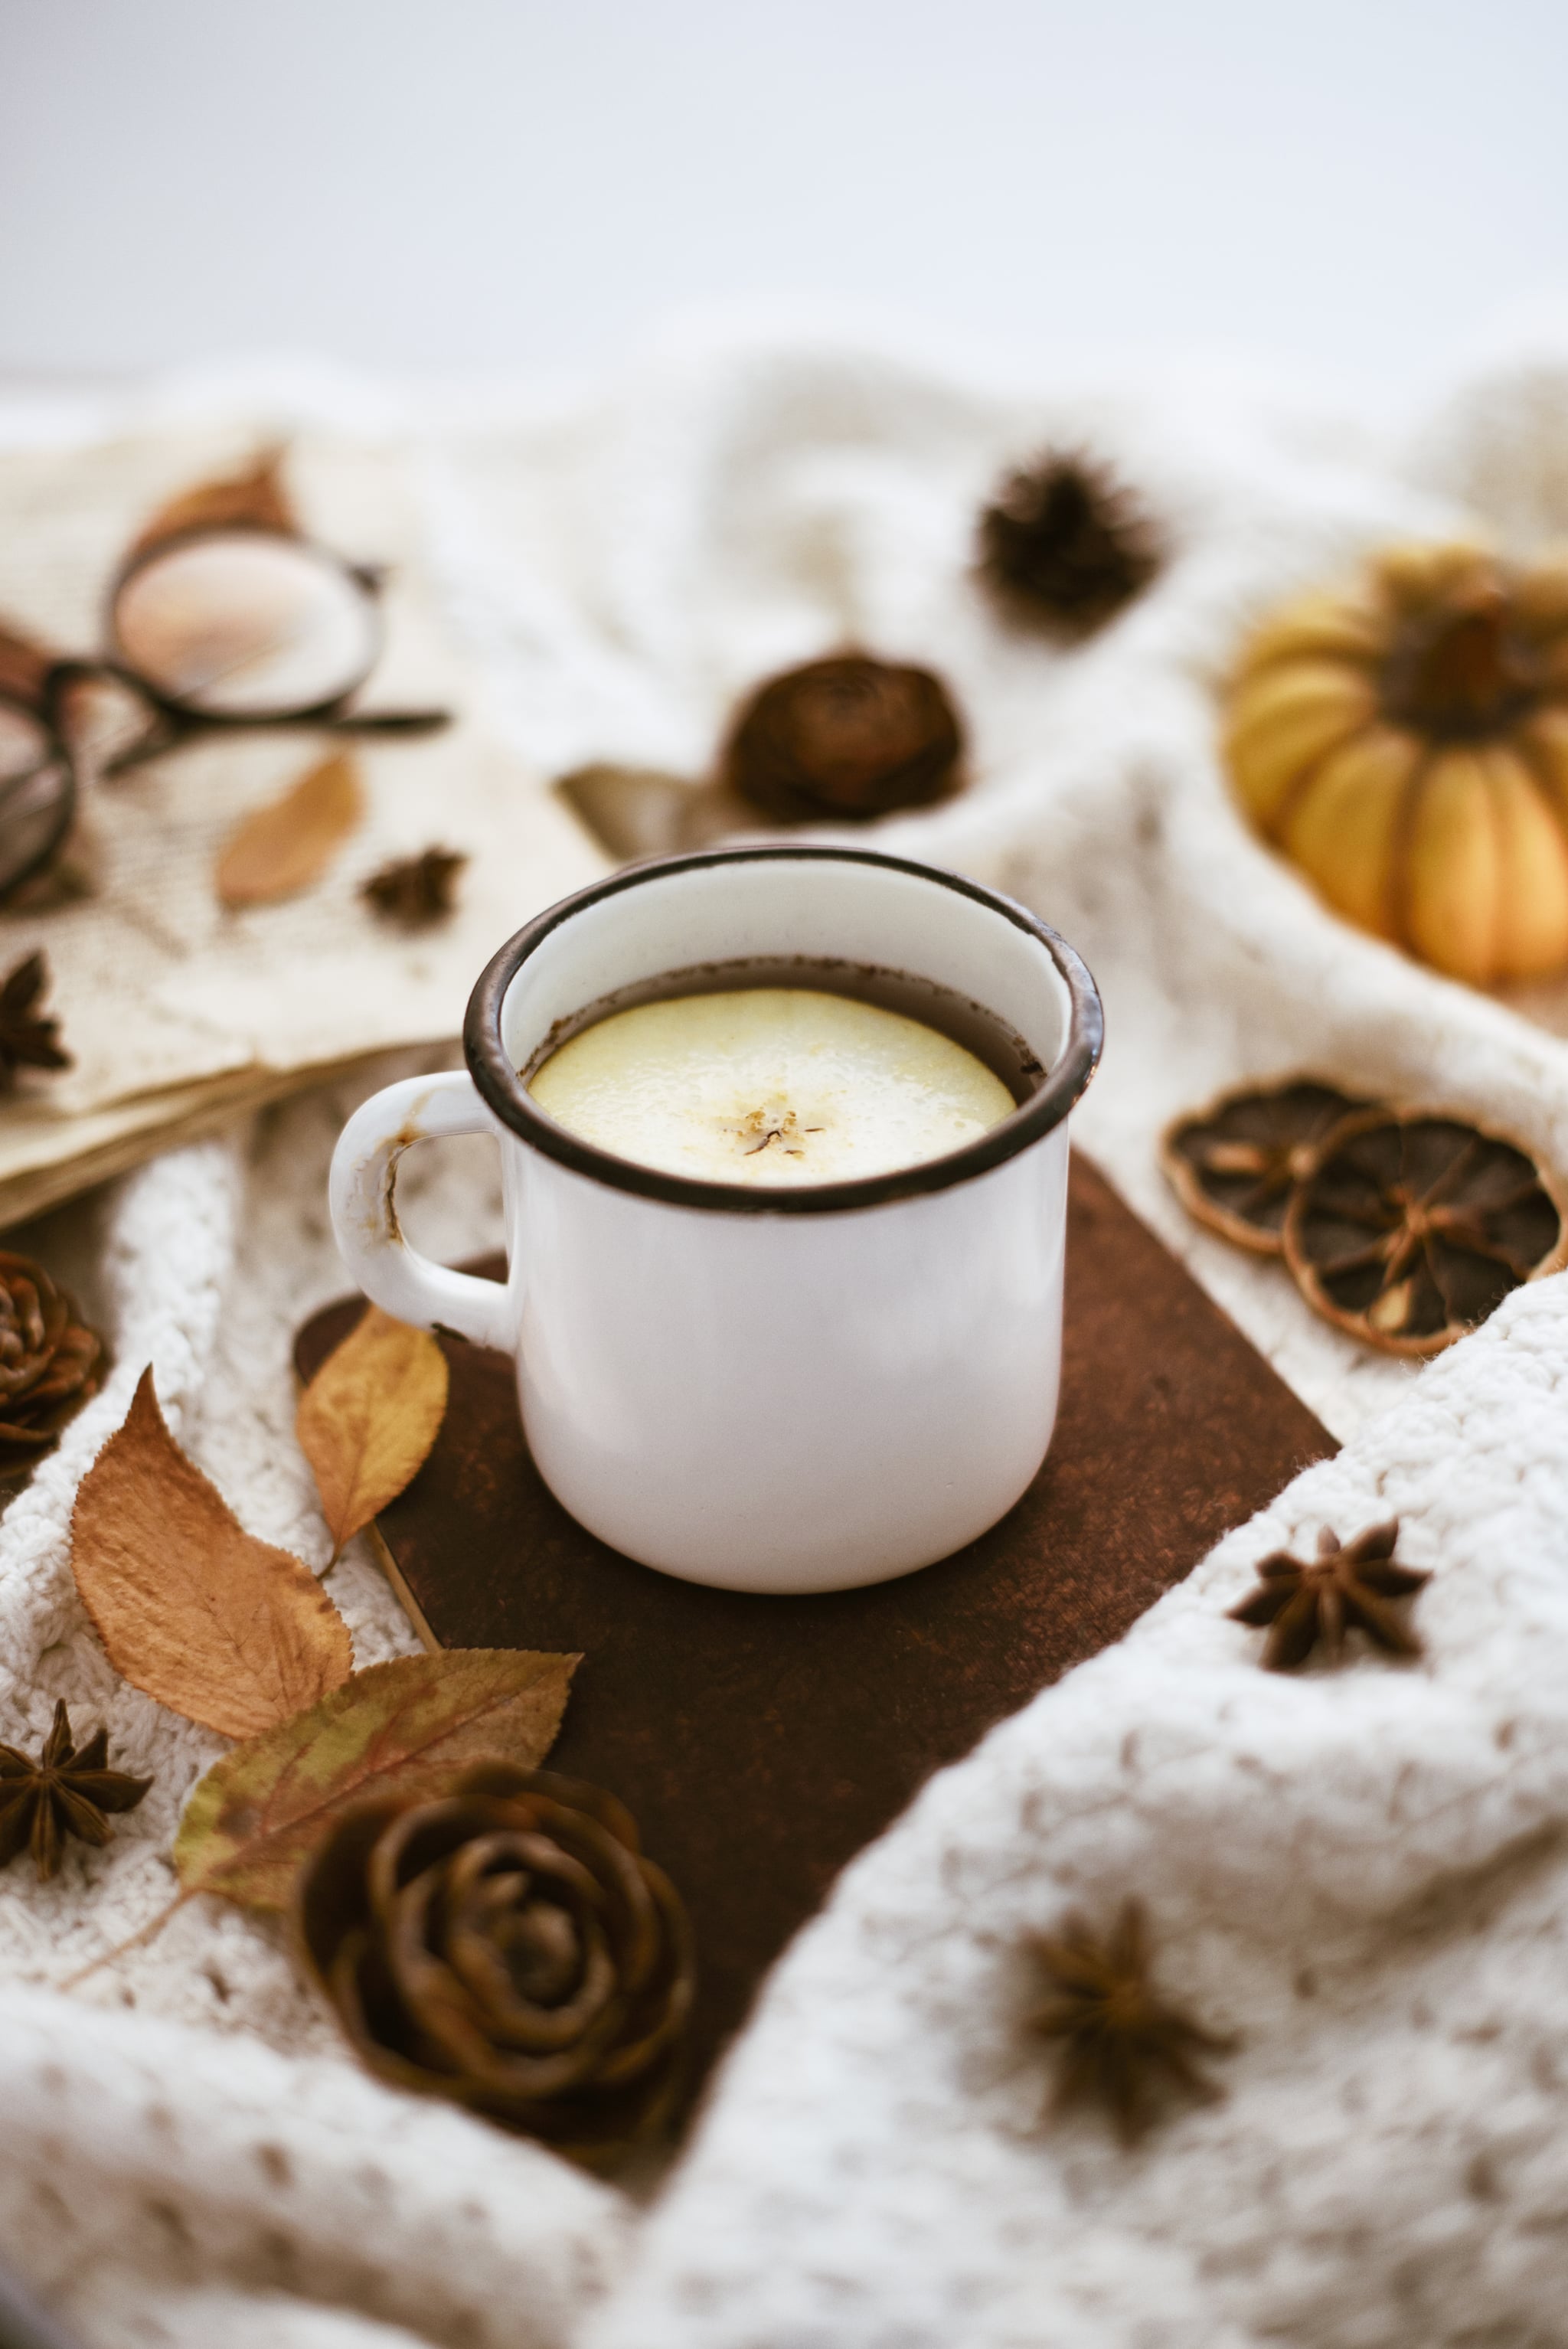 Fall Background: Cozy Tea iPhone Wallpaper Fall iPhone Wallpaper That'll Instantly Make You Feel Cozy